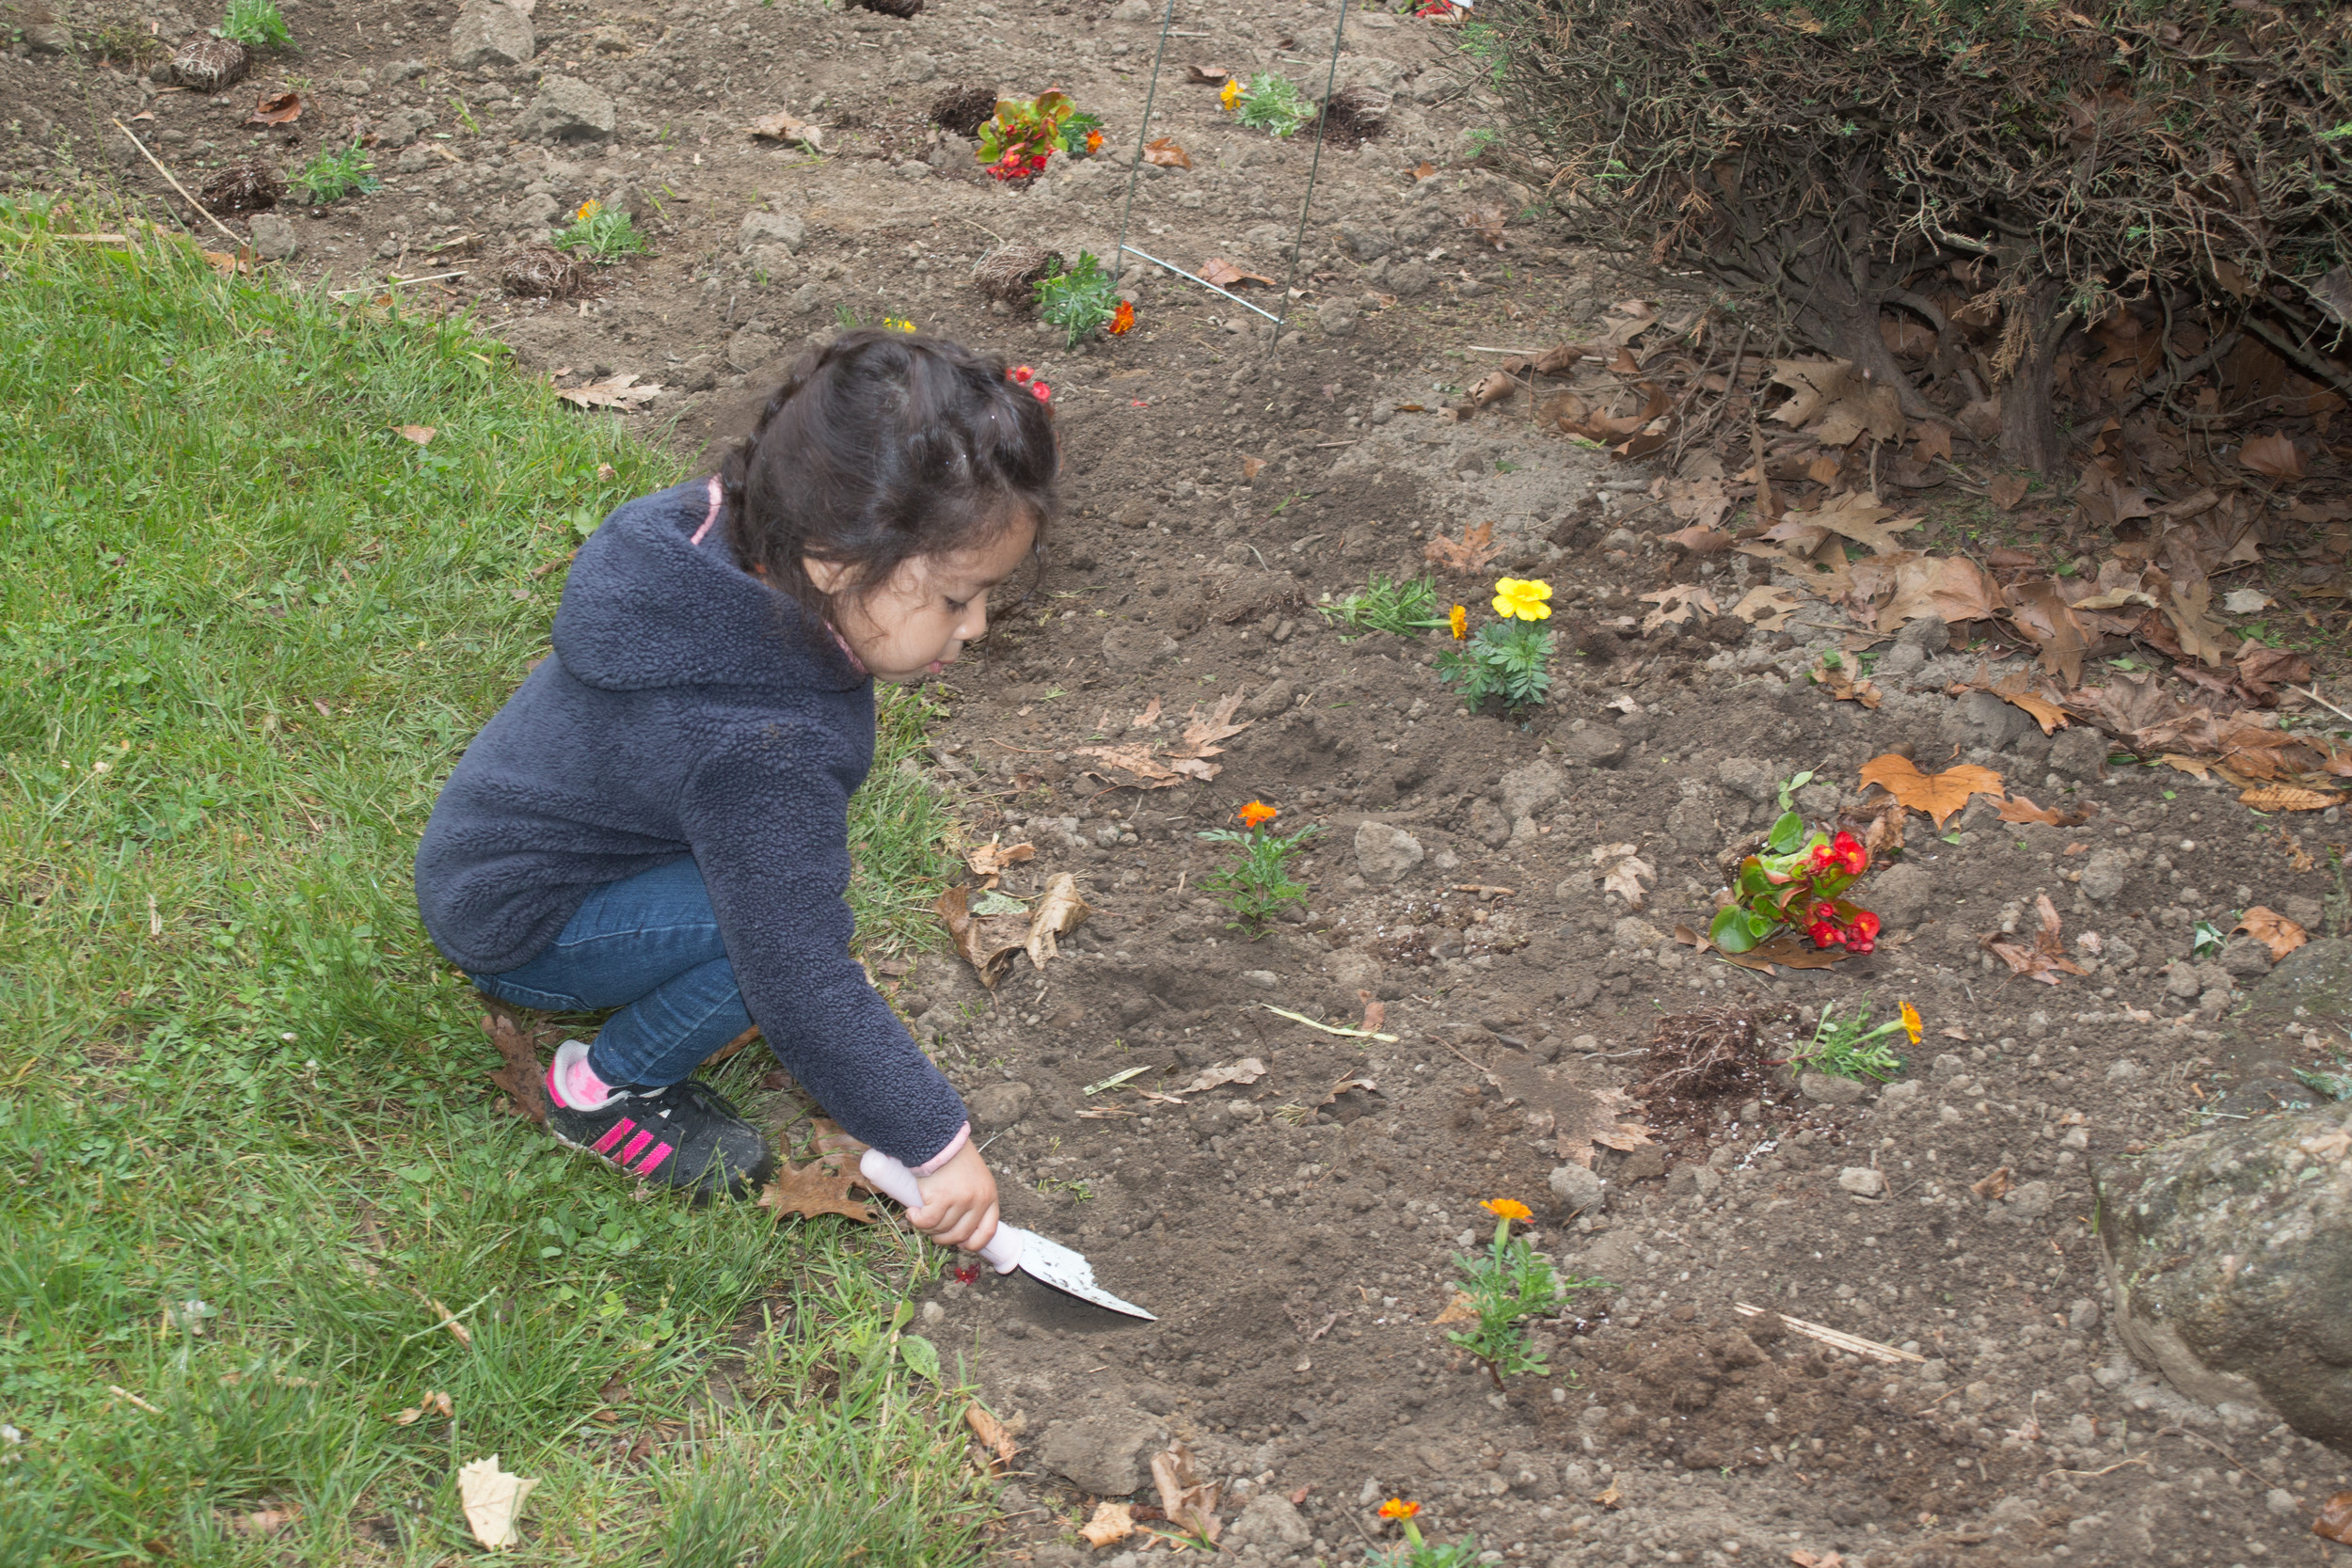 Ariela Rodriguez had fun in the garden in spite of the rainy weather.